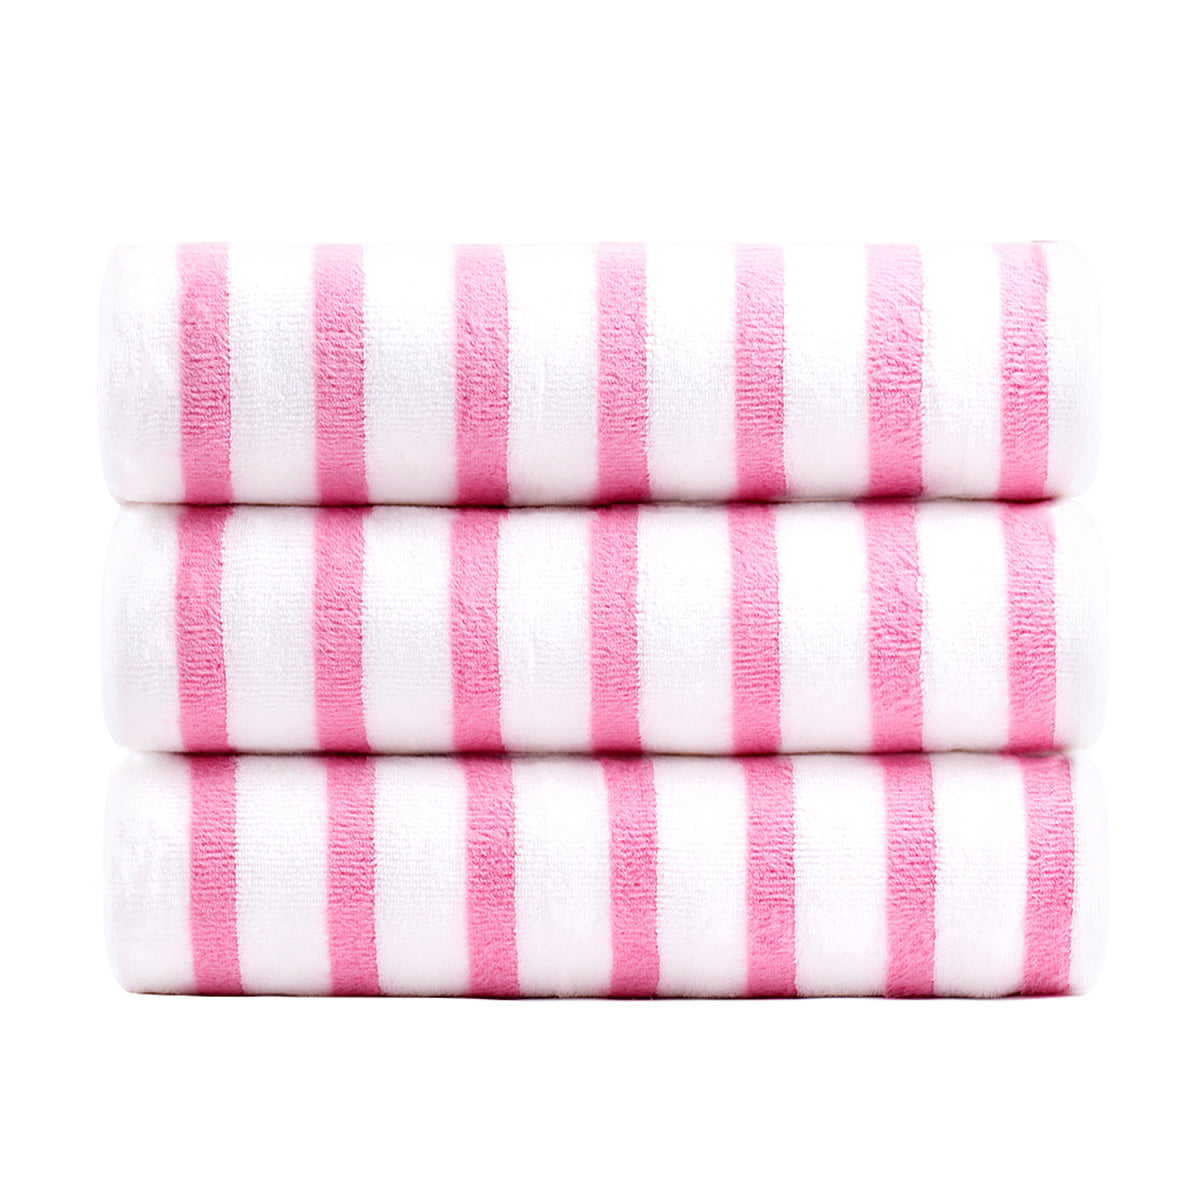 Woolaty Pink Stripe-Band Bath Towel, Best Price and Reviews